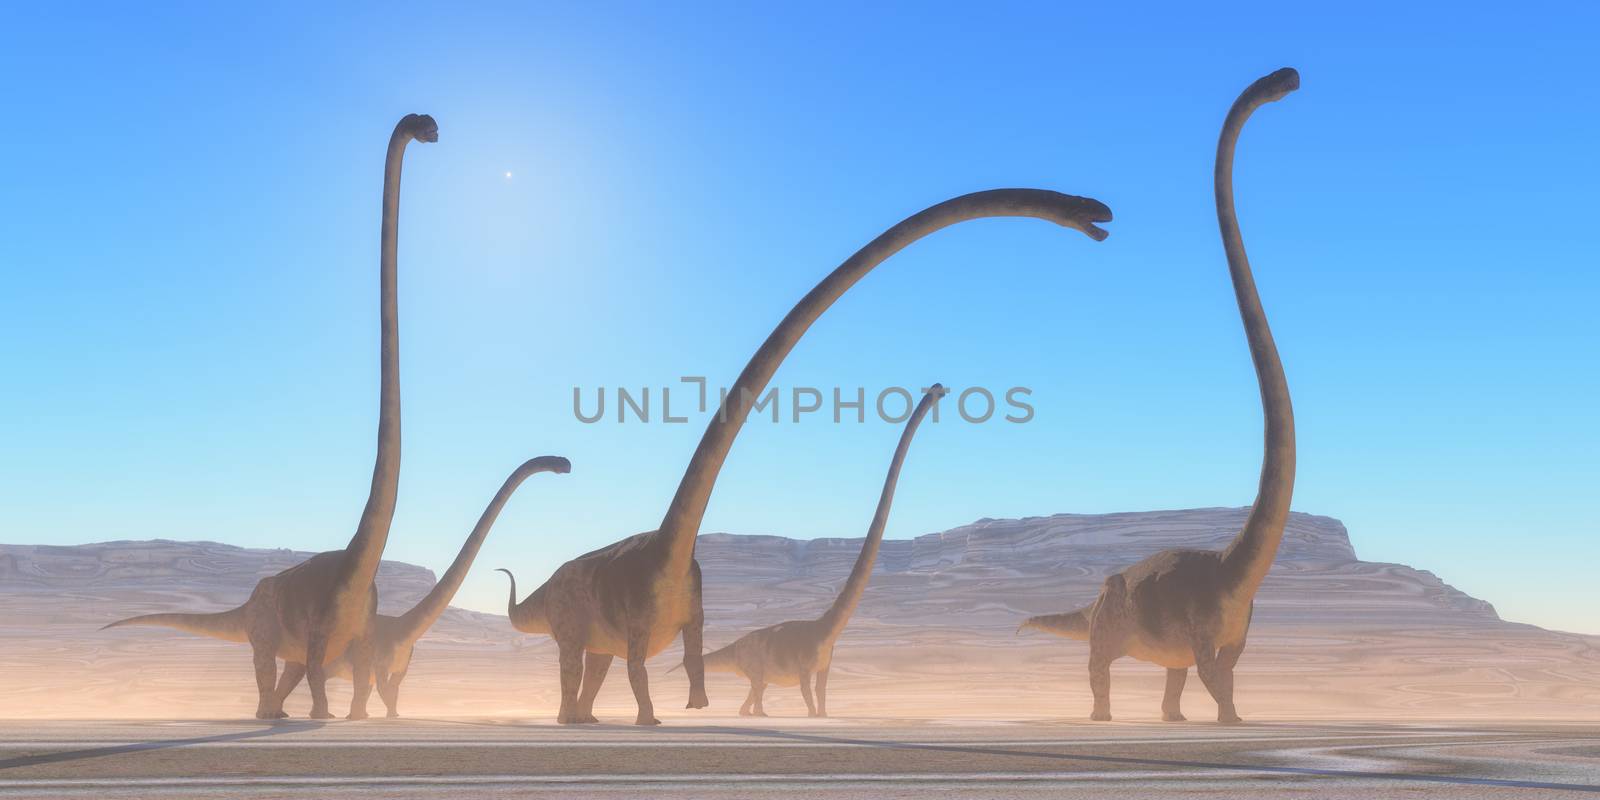 An Omeisaurus herd walks across a dry desert in their search for vegetation and water in the Jurassic Period.